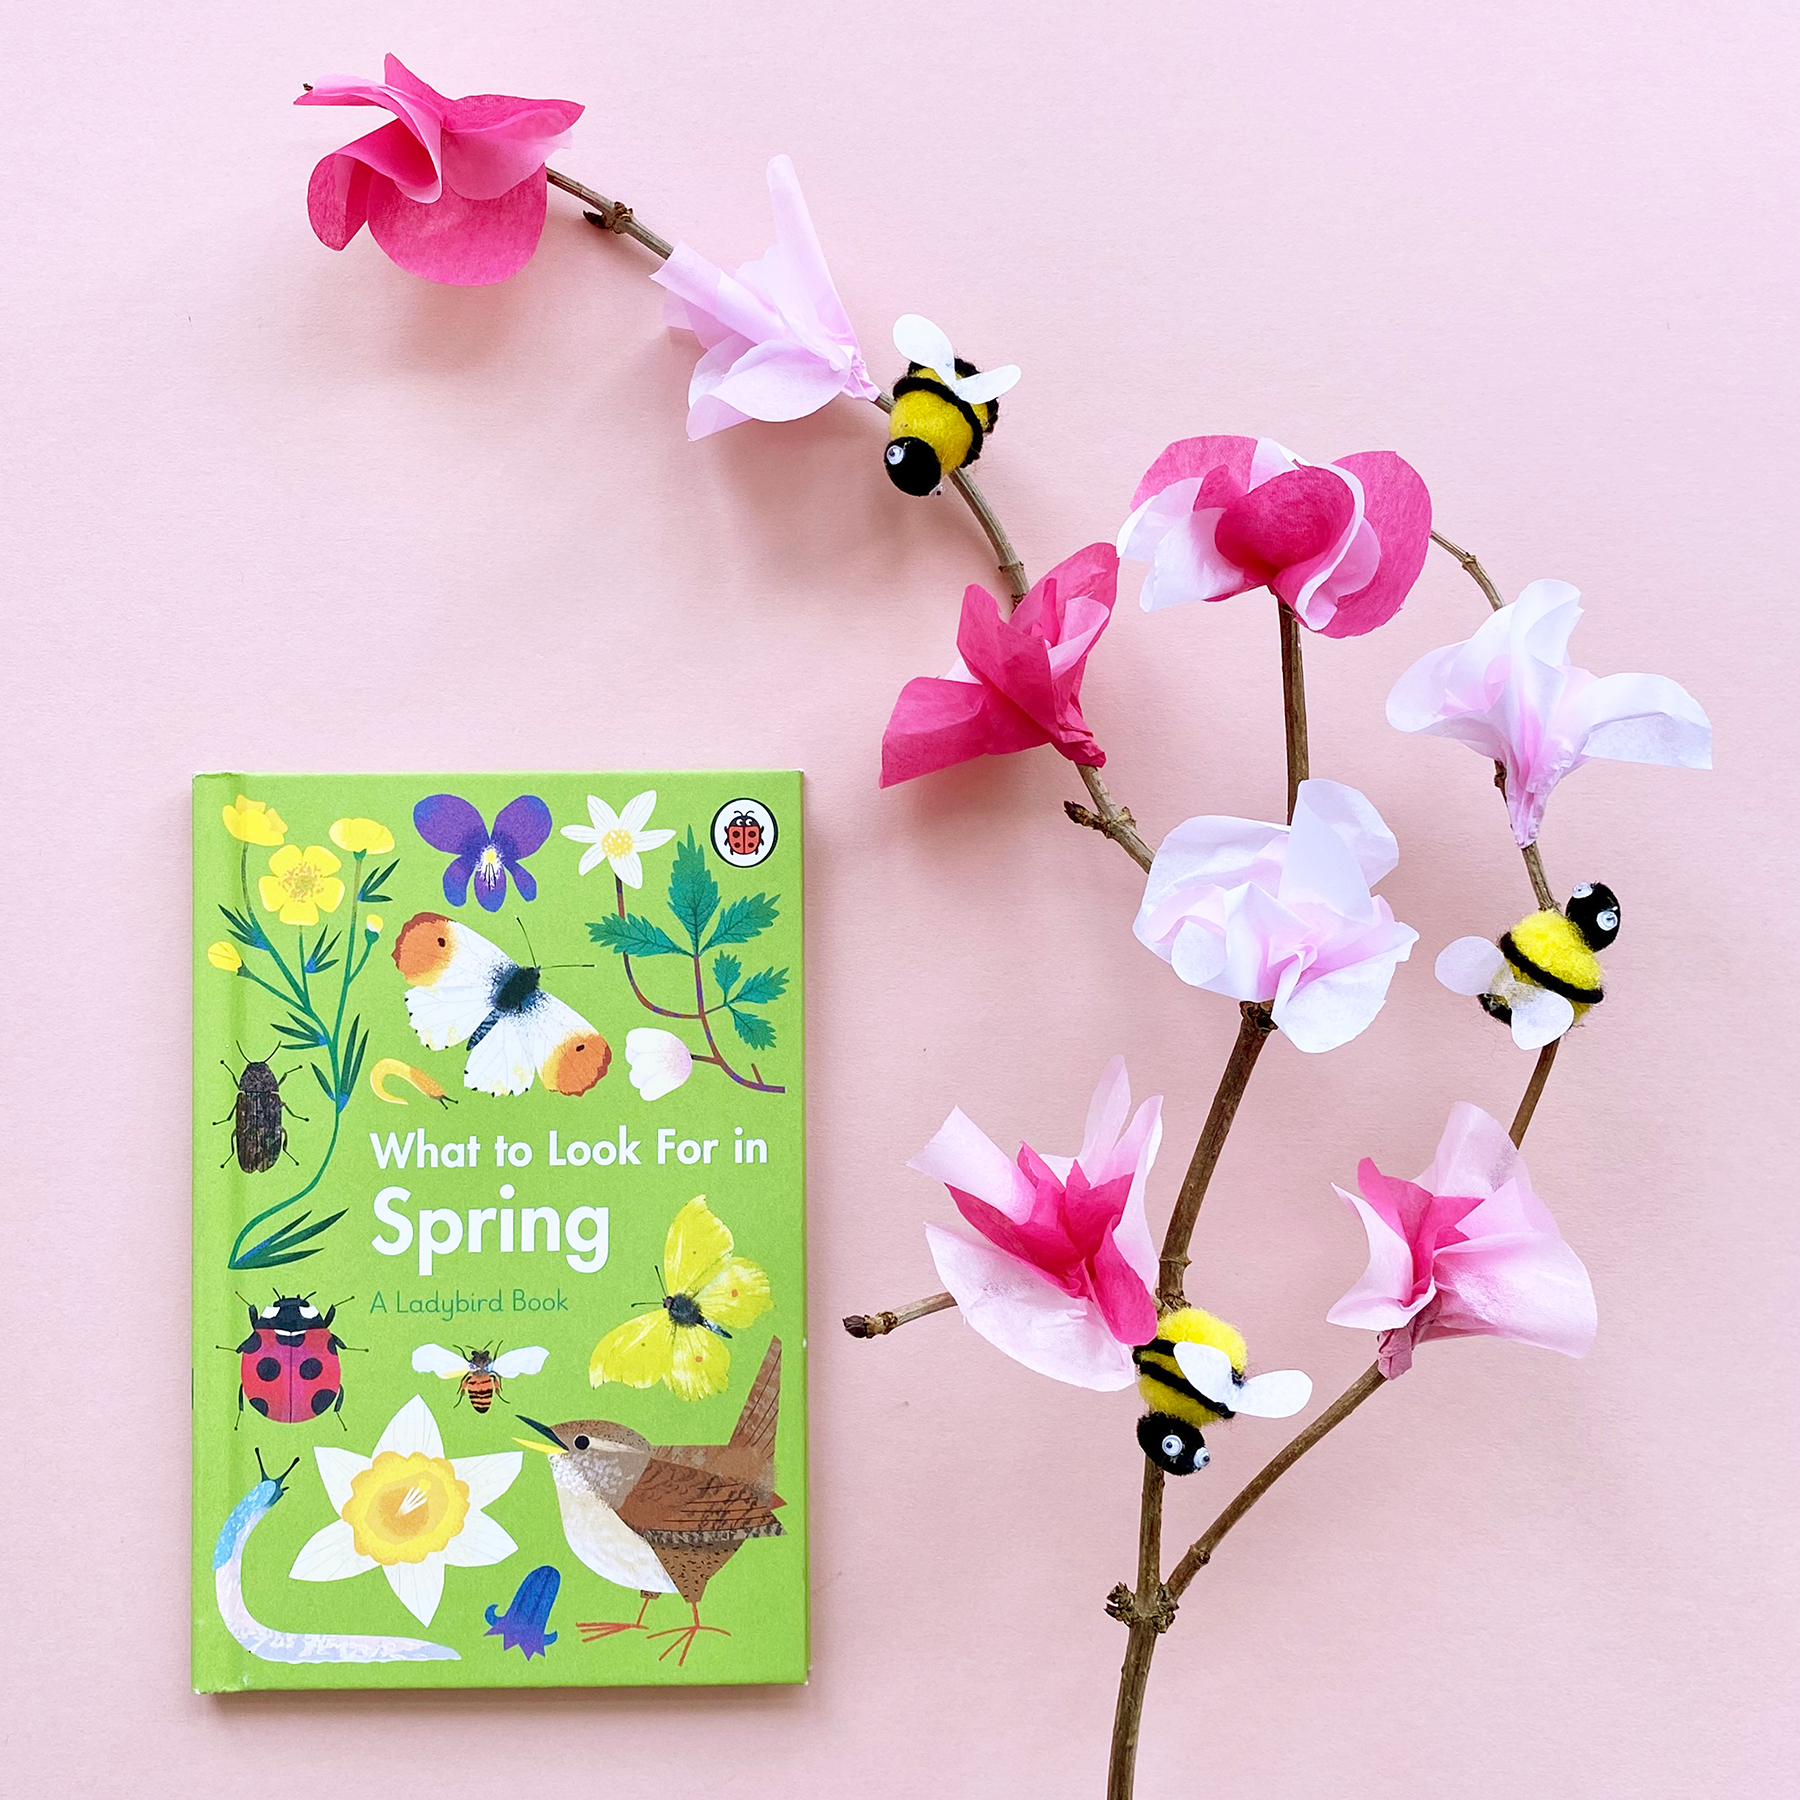 Photograph of homemade cherry blossoms and bees alongside a book called What to Look for in Spring by Elizabeth Jenner